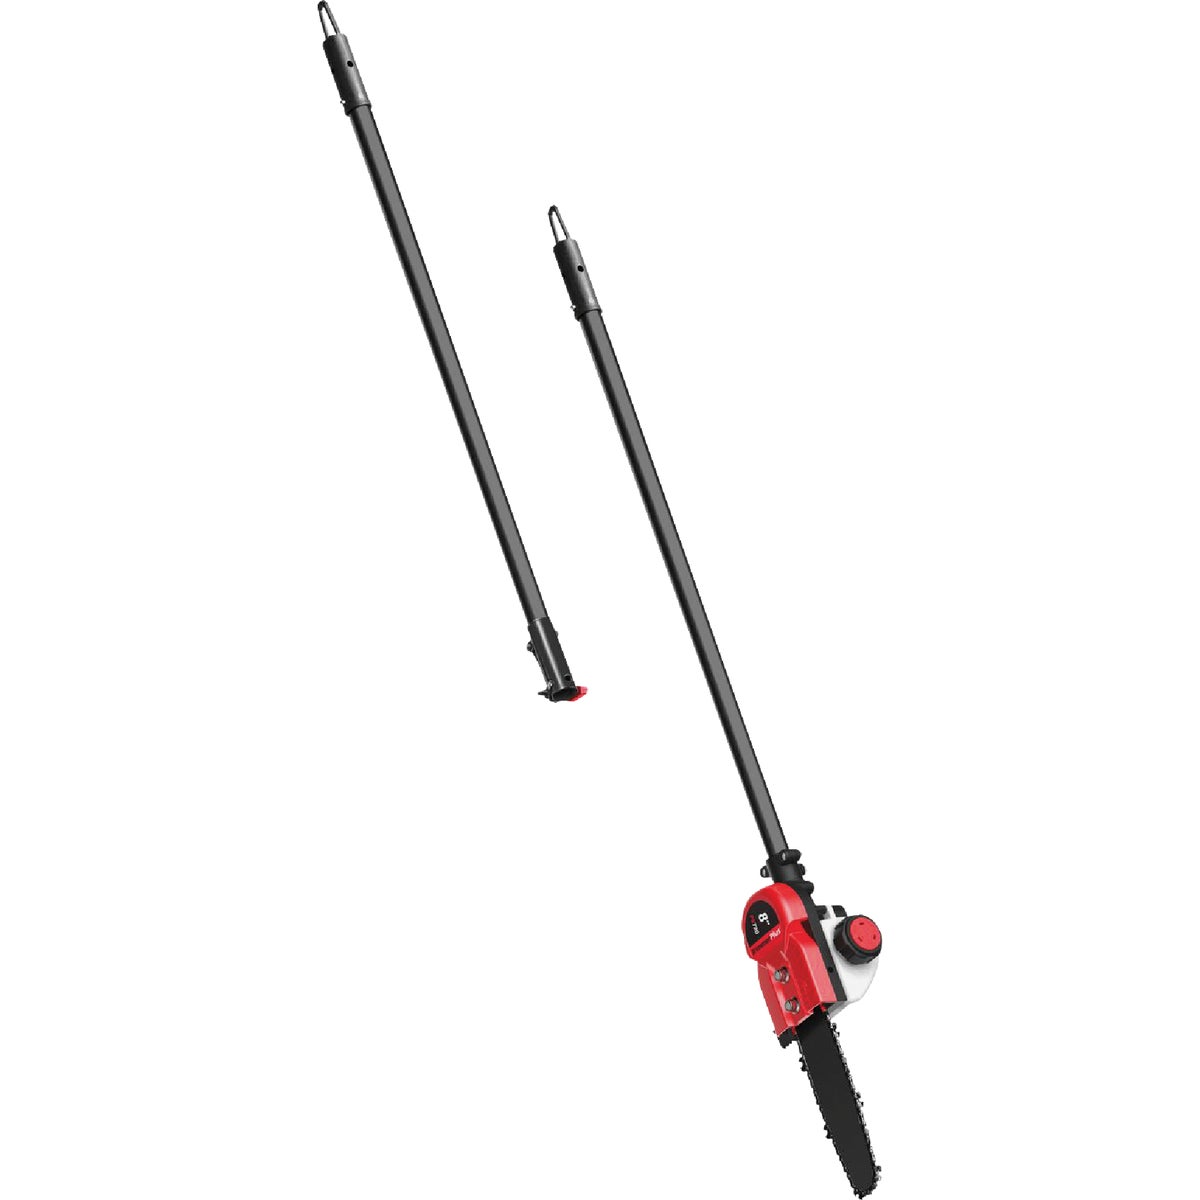 Item 705929, TrimmerPlus Pole Saw Attachment has an 8" bar with automatic oiler that 